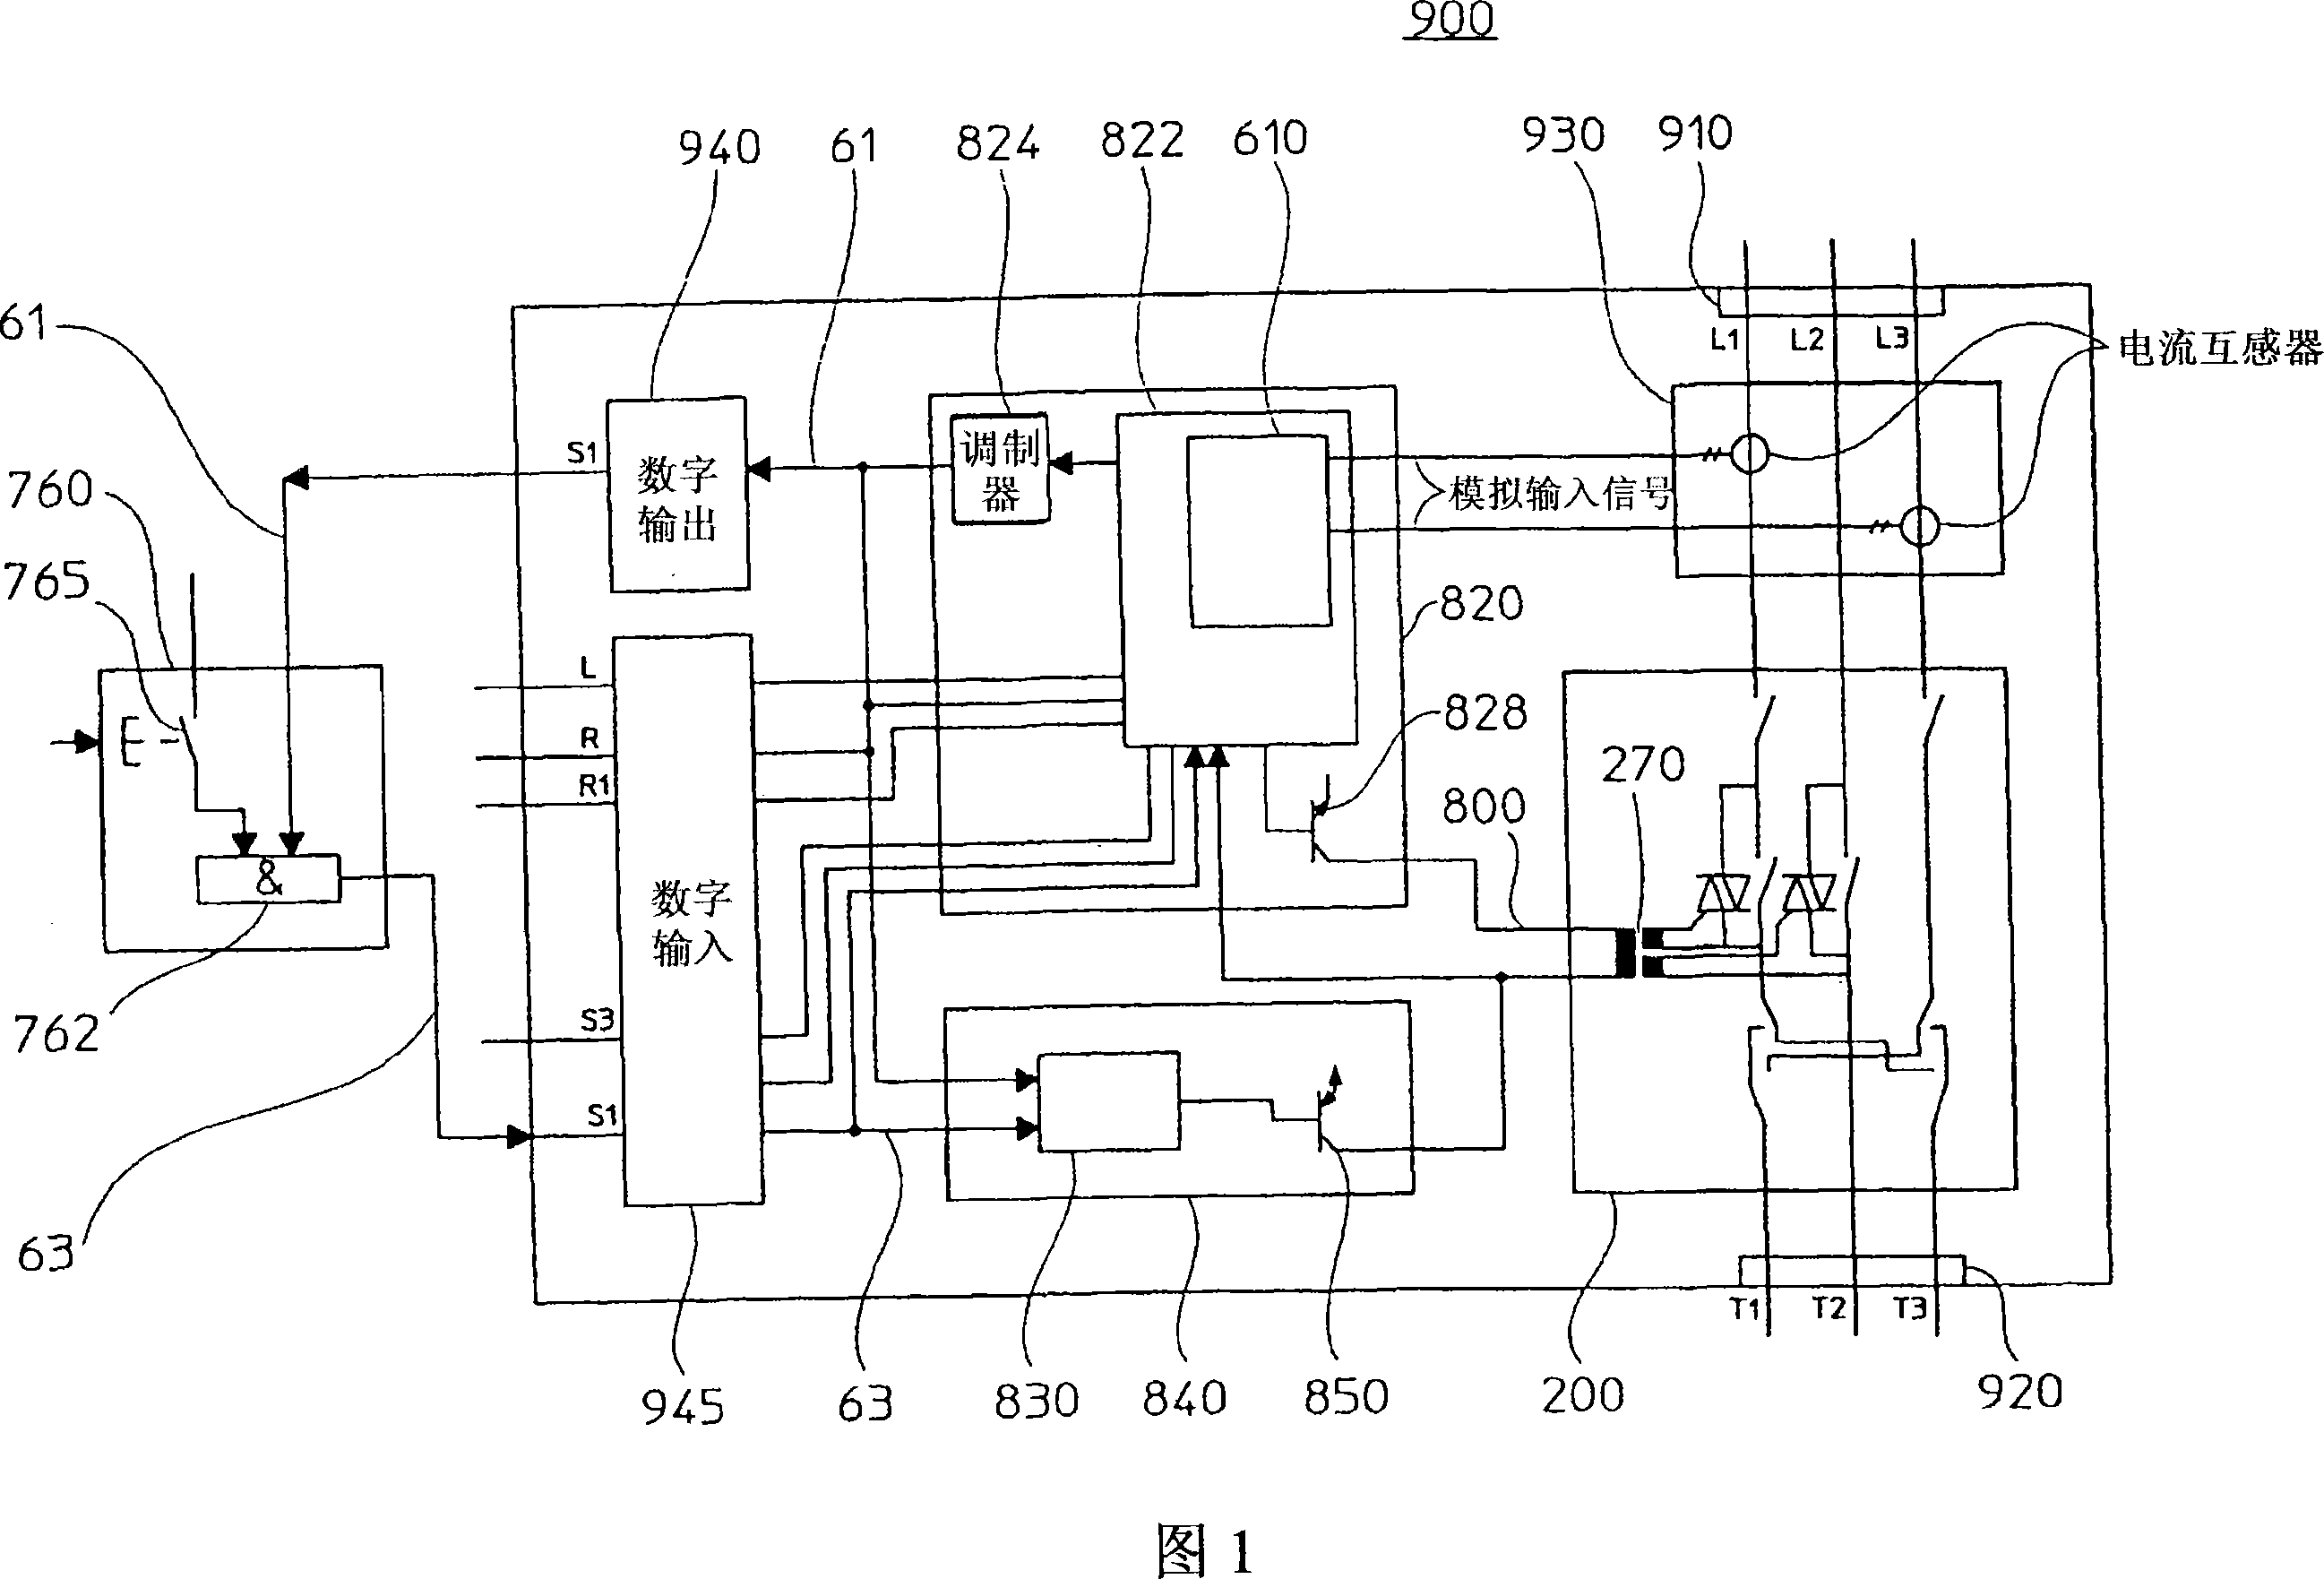 Safety switching unit for controlling a safety device into a safe state